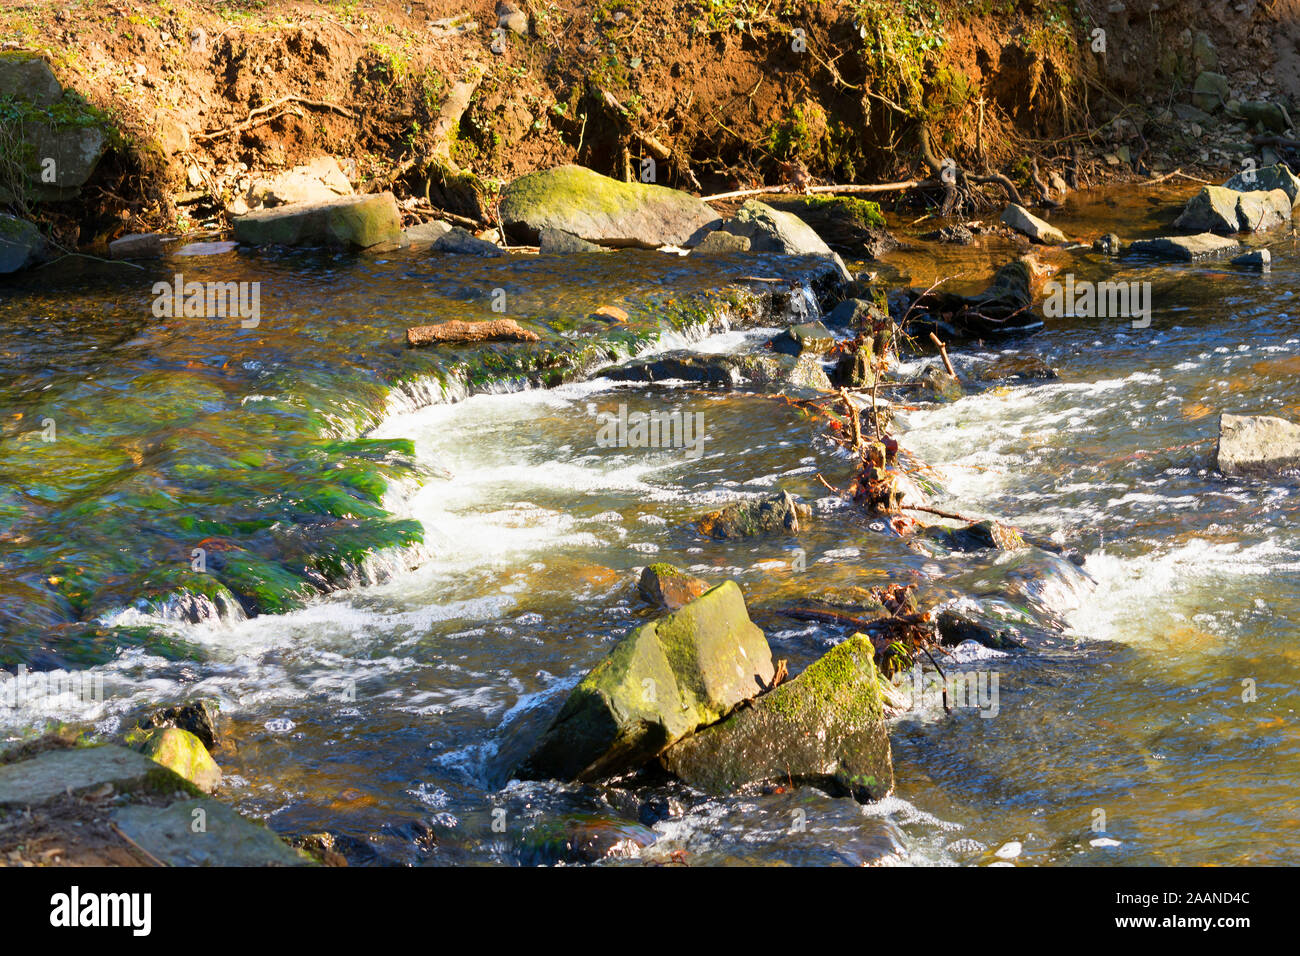 Forest River waterfall view. Wild rapids. Forest wild river water stream. Stock Photo